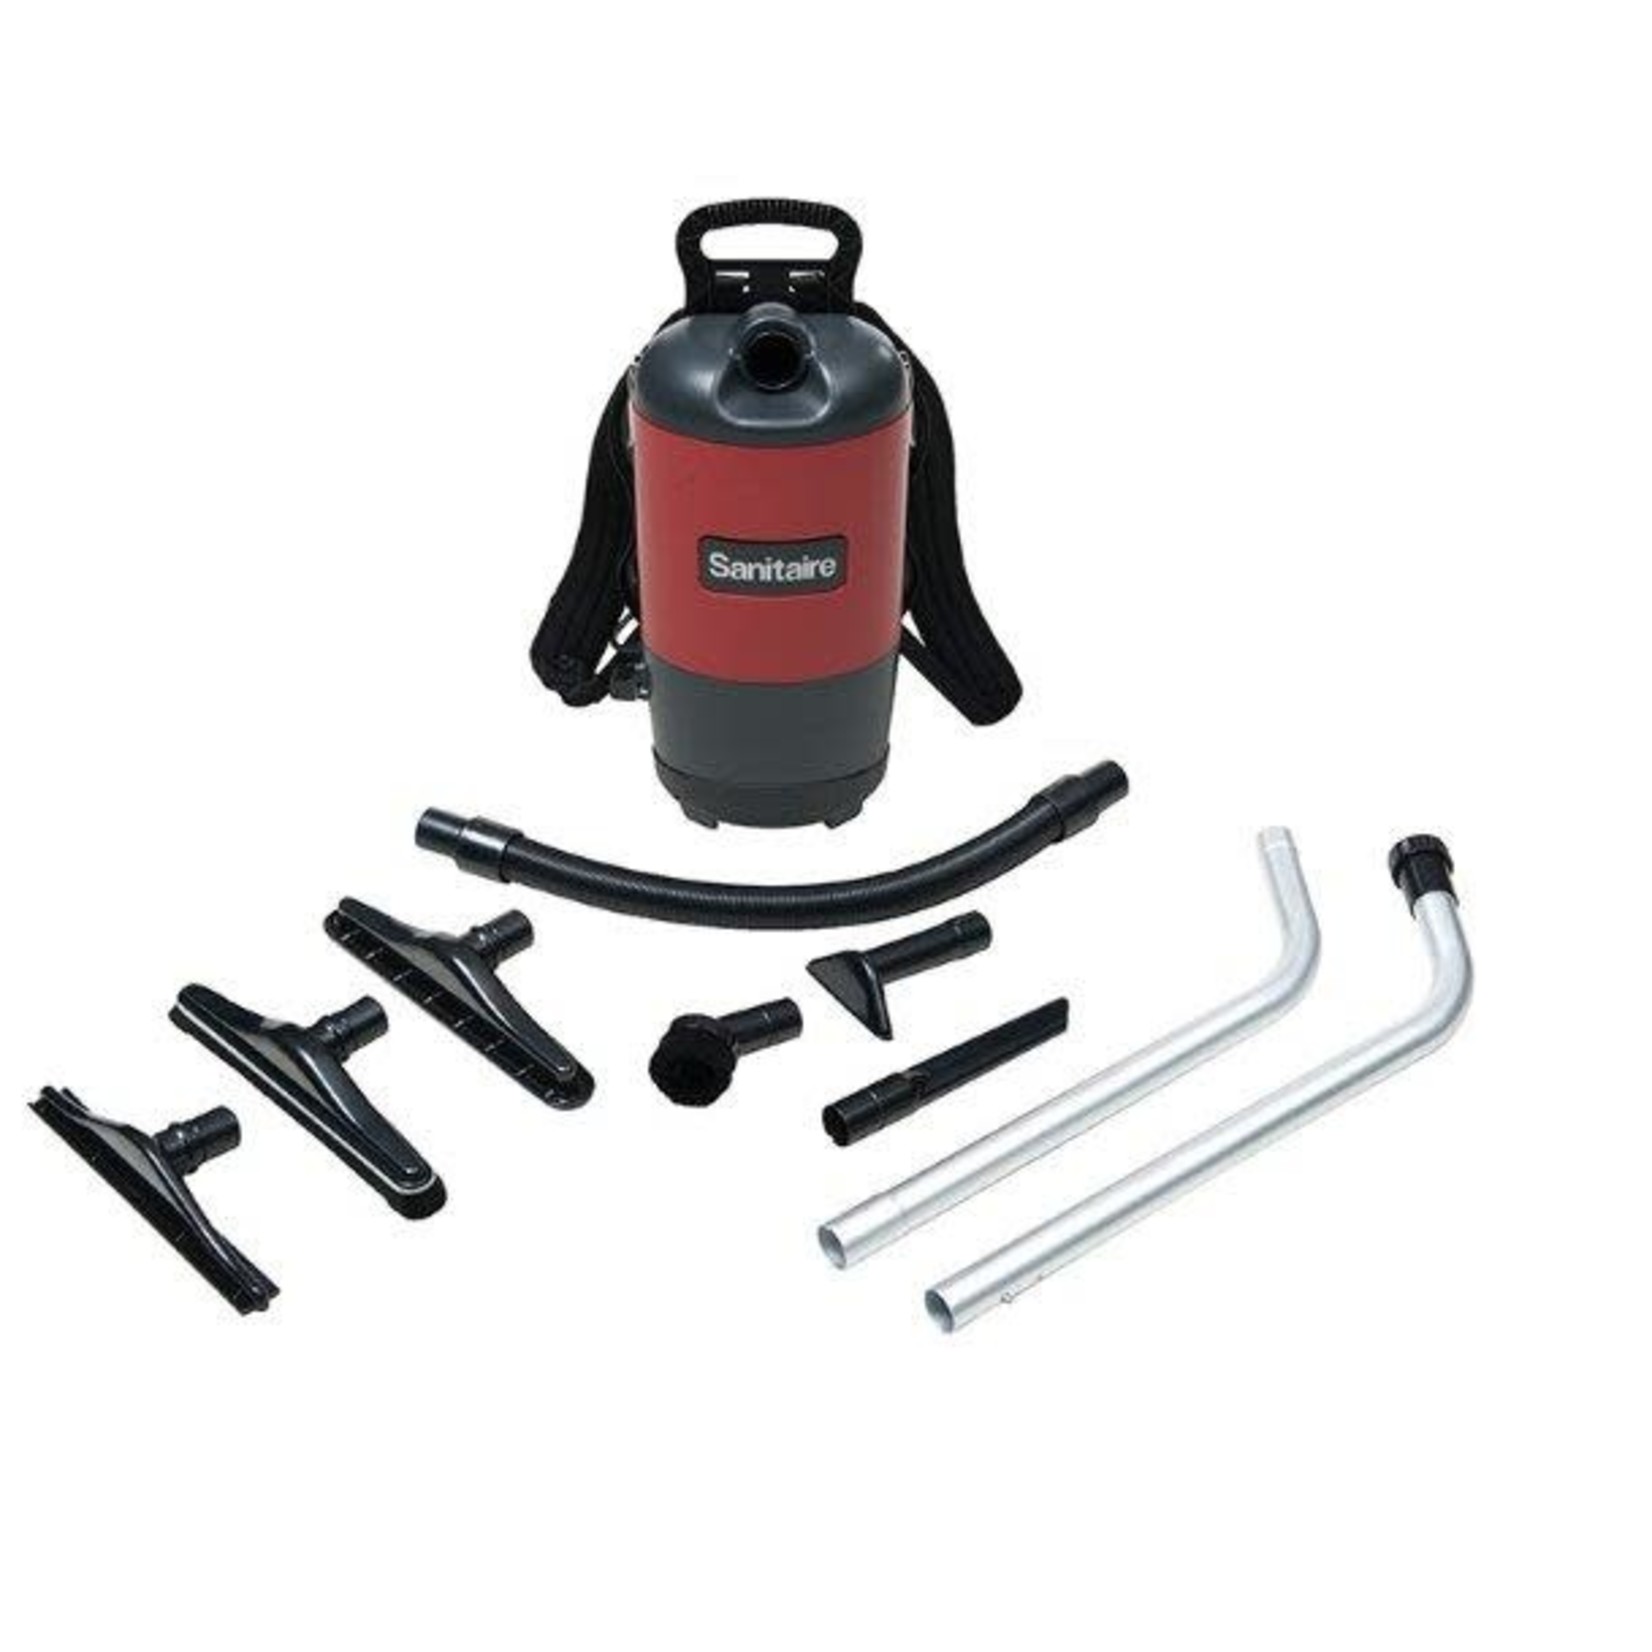 Sanitaire Sanitaire Backpack Vacuum with Accessories - SC412